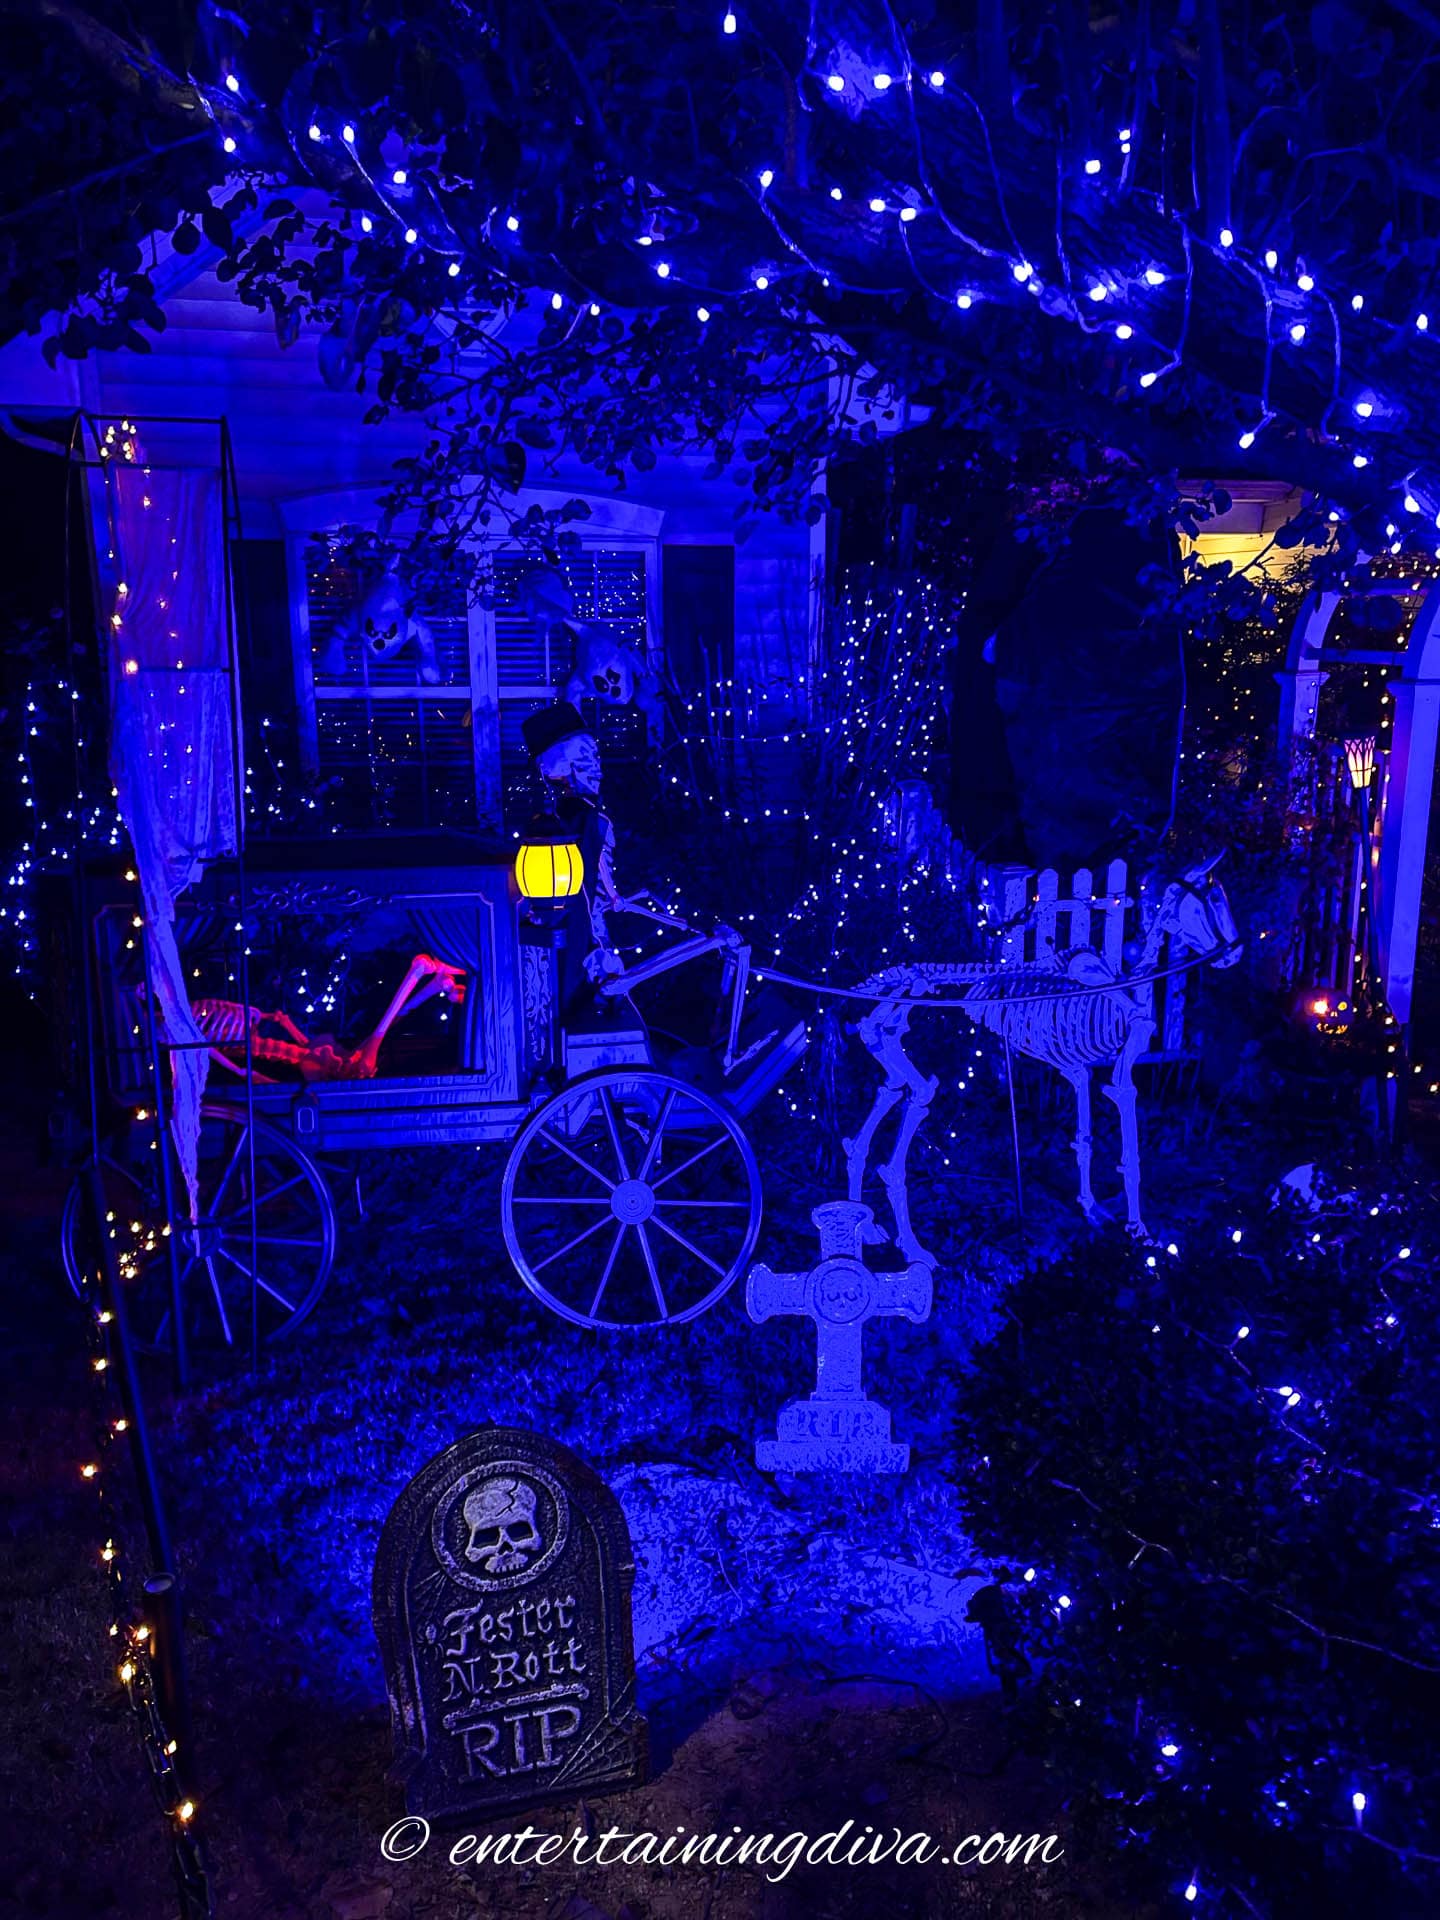 A skeleton in a carriage with blue lights for Halloween outdoor lighting.